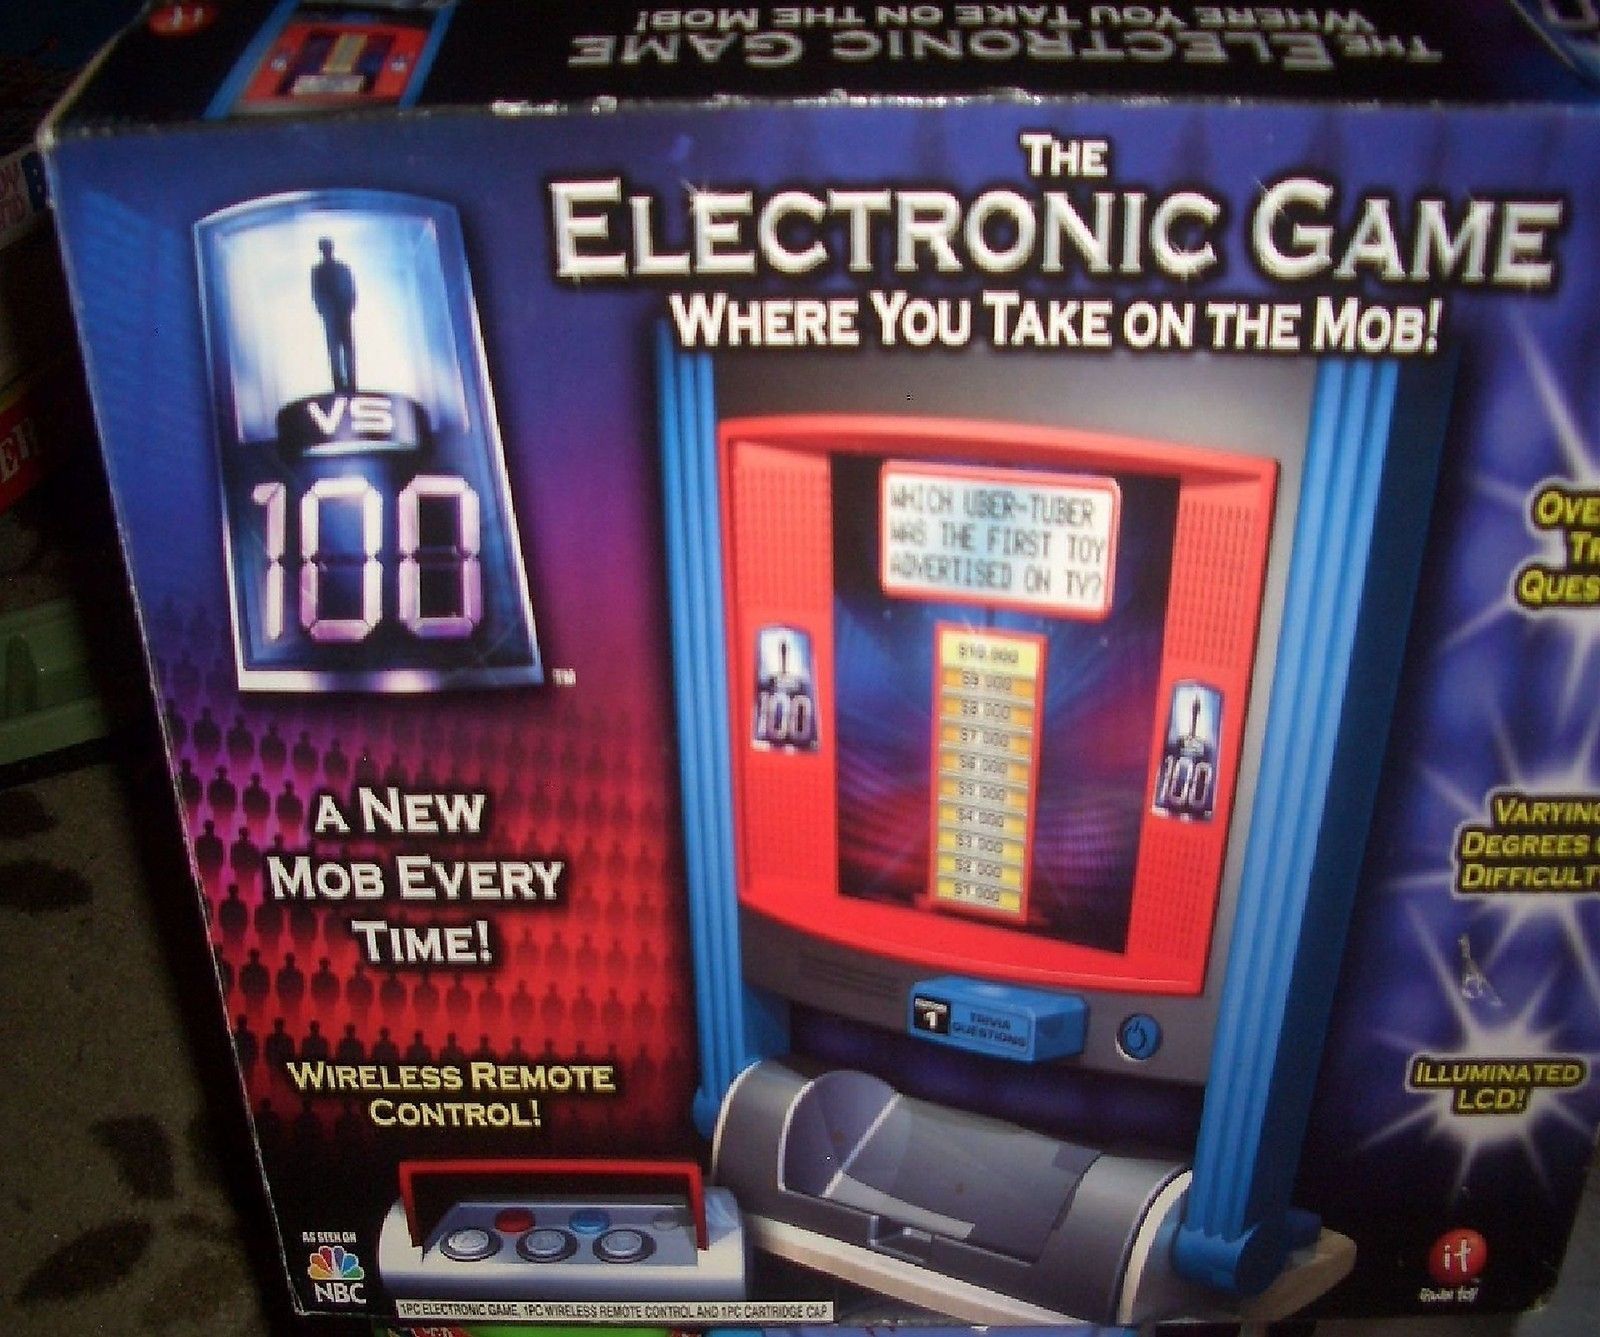 VS 100 THE ELECTRONIC GAME WHERE YOU TAKE ON THE MOB - $28.00